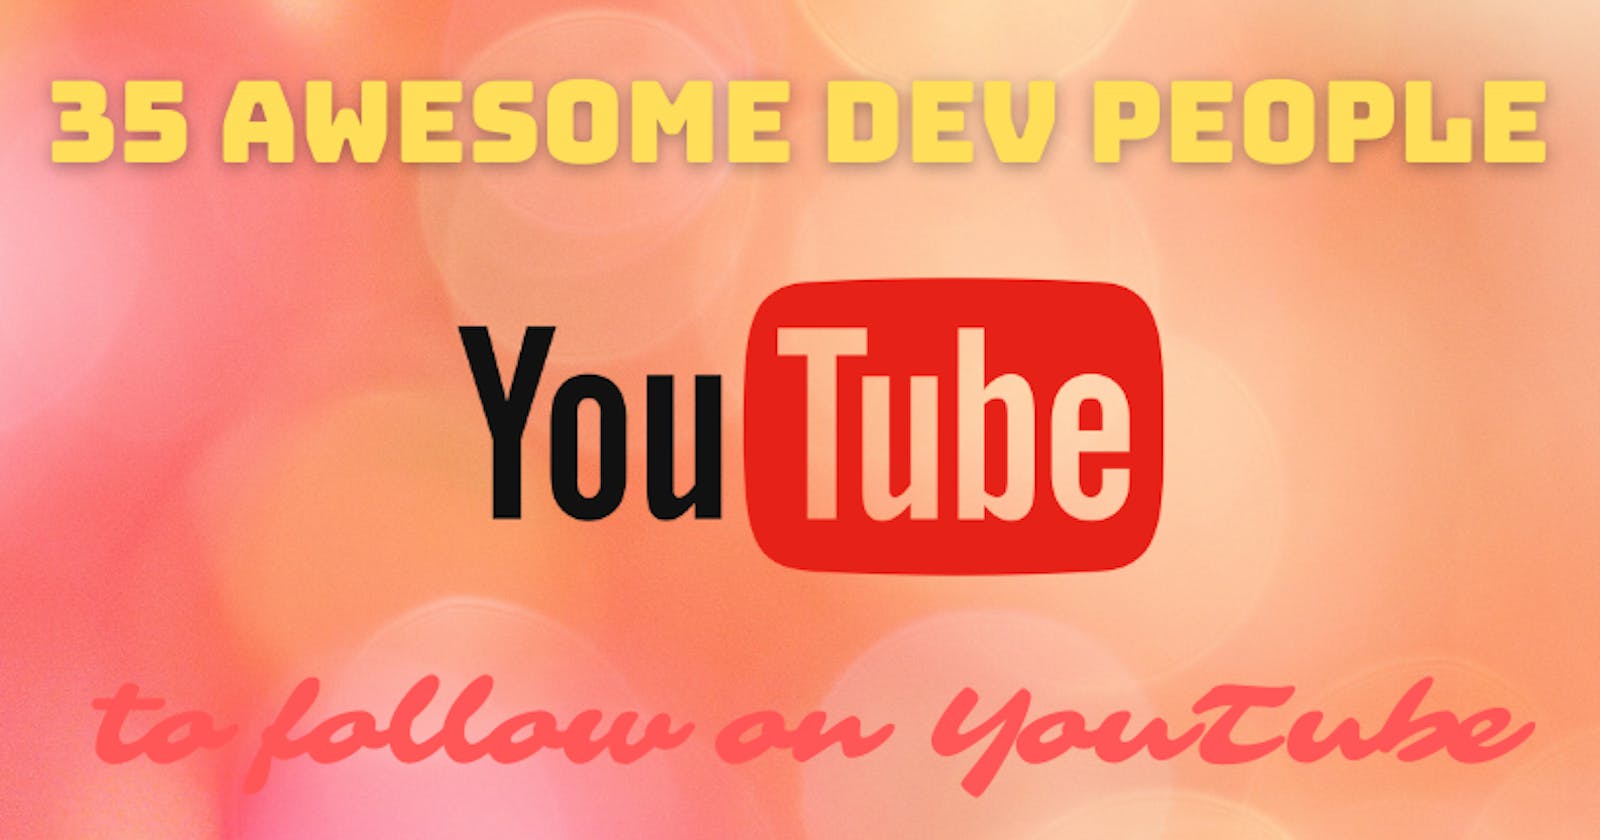 35 Awesome Dev People to Follow on YouTube 🔥